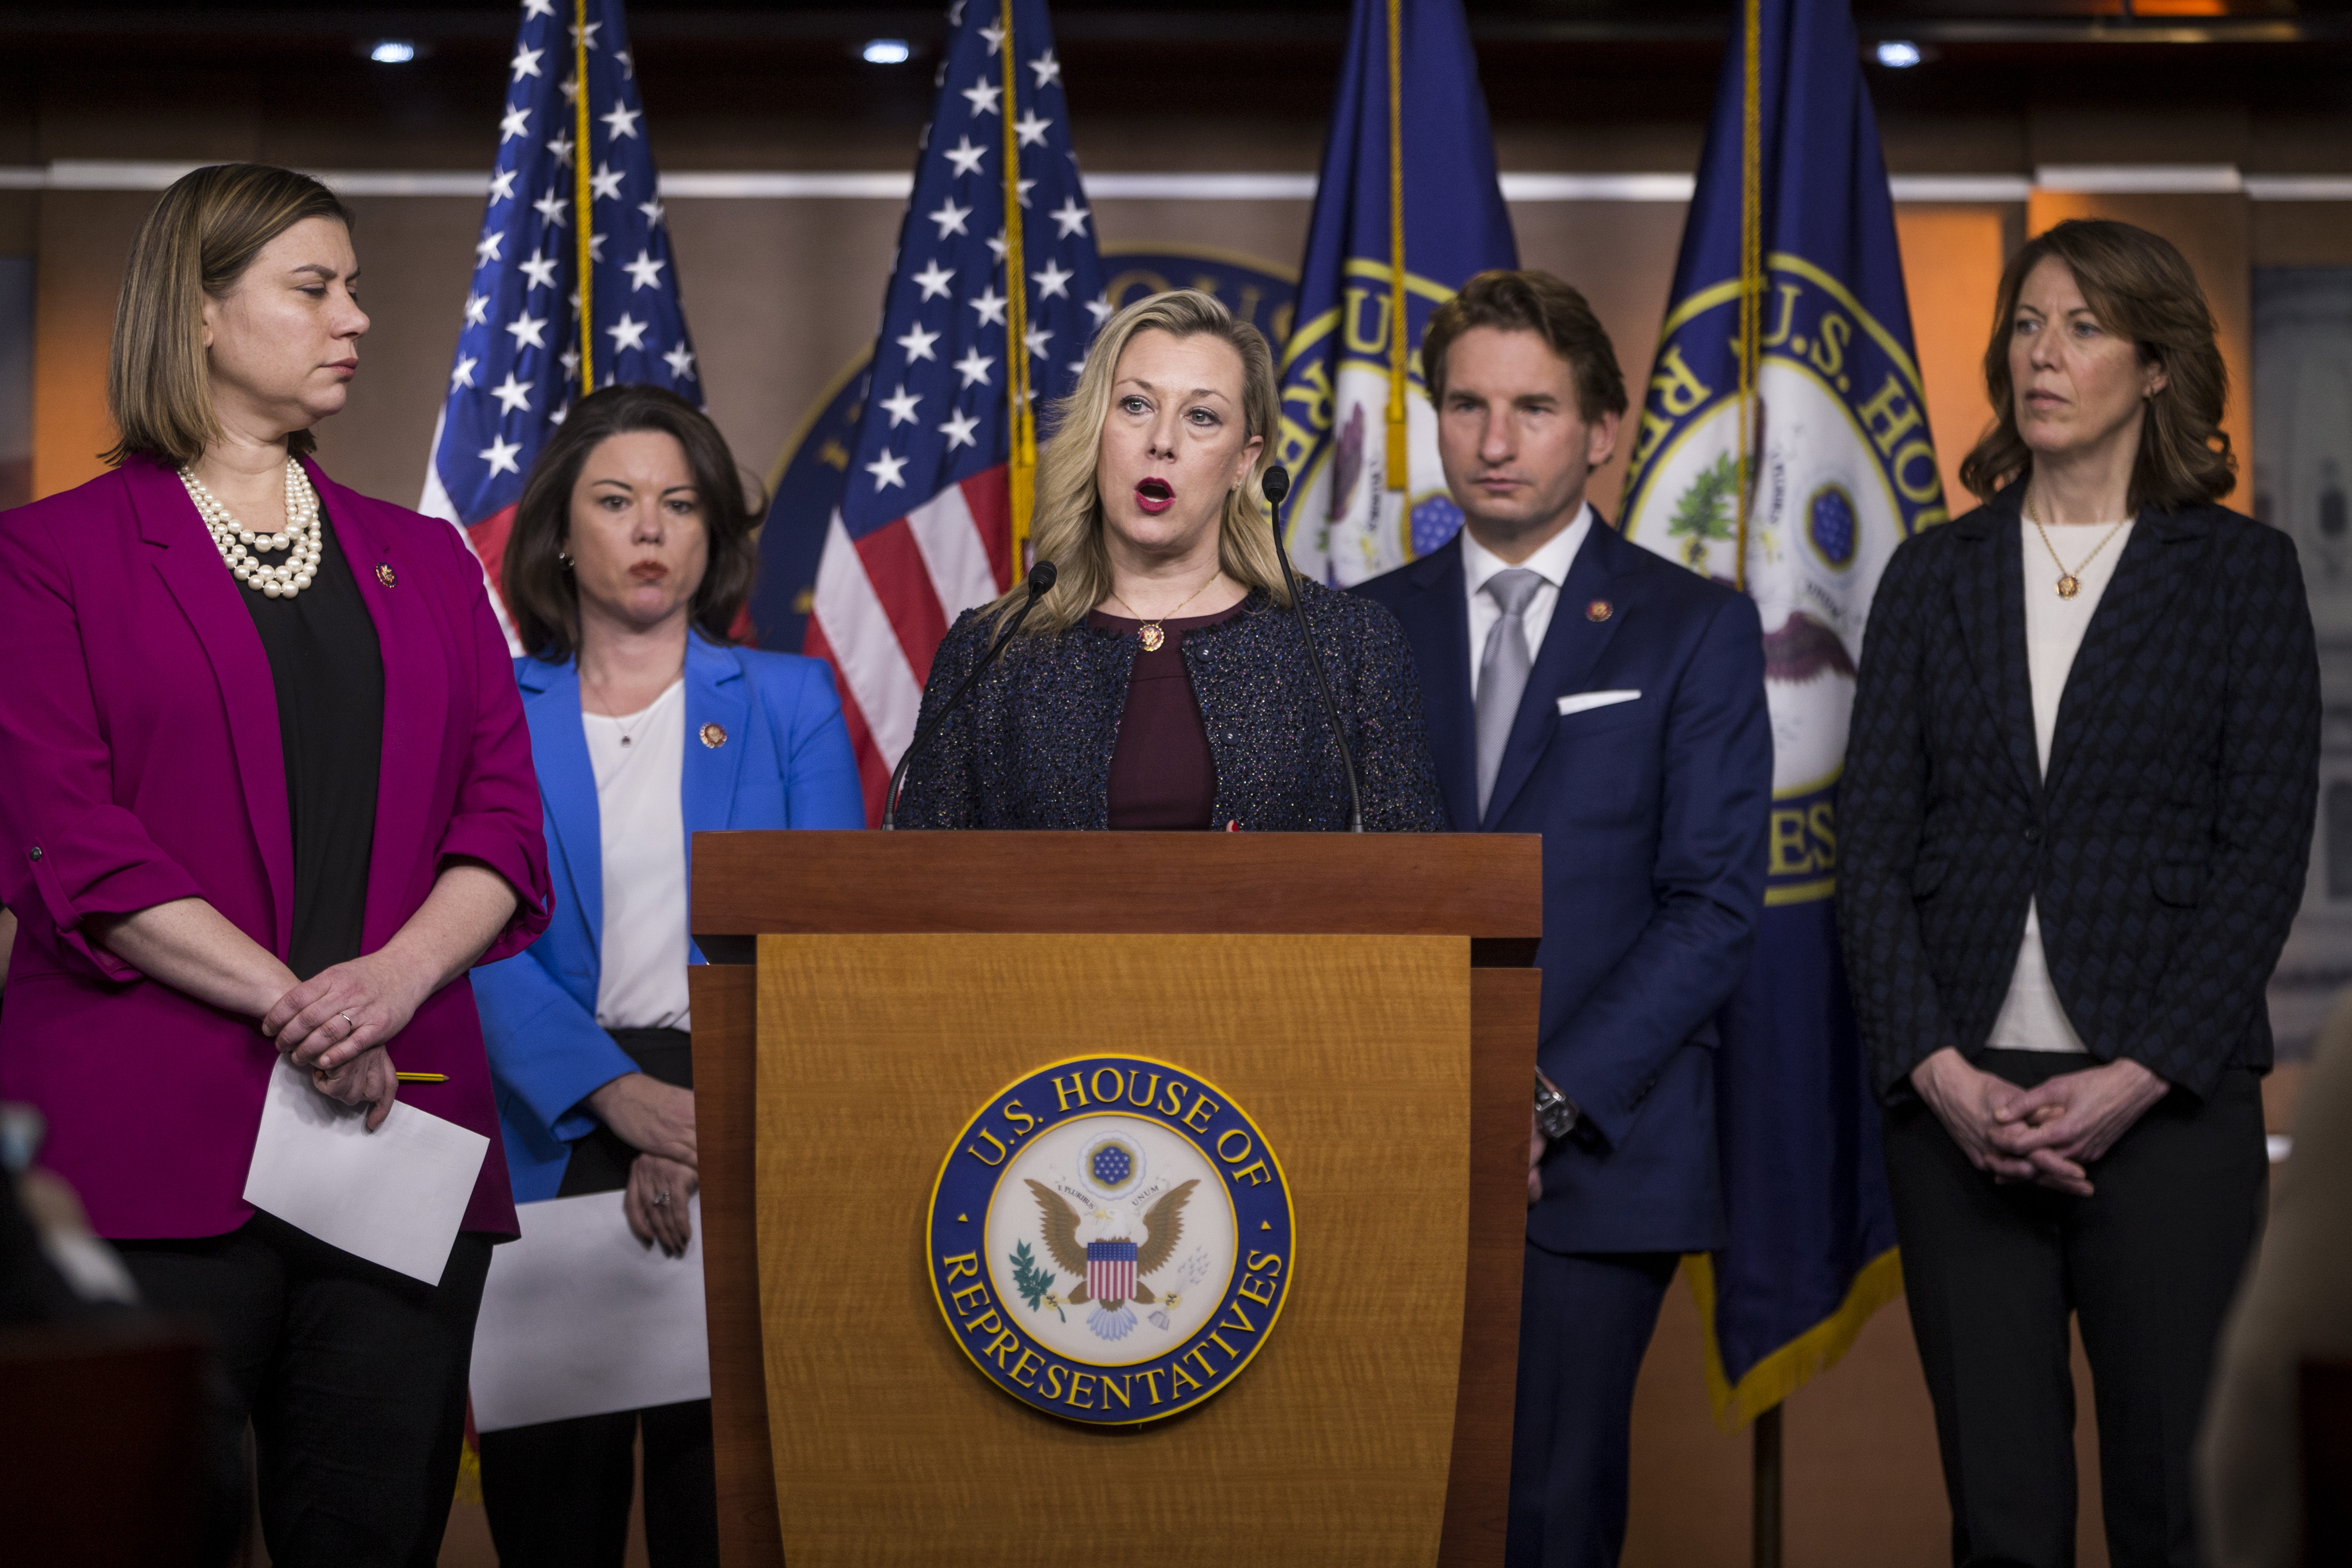 WASHINGTON, DC - JANUARY 29: Rep. Kendra Horn (D-OK) speaks during news conference discussing the "Shutdown to End All Shutdowns (SEAS) Act" on January 29, 2019 in Washington, DC. Also pictured are Rep. Elissa Slotkin (D-MI), Rep. Angie Craig (D-MN), Rep. Dean Phillips (D-MN), and Rep. Cindy Axne (D-IA). (Photo by Zach Gibson/Getty Images)